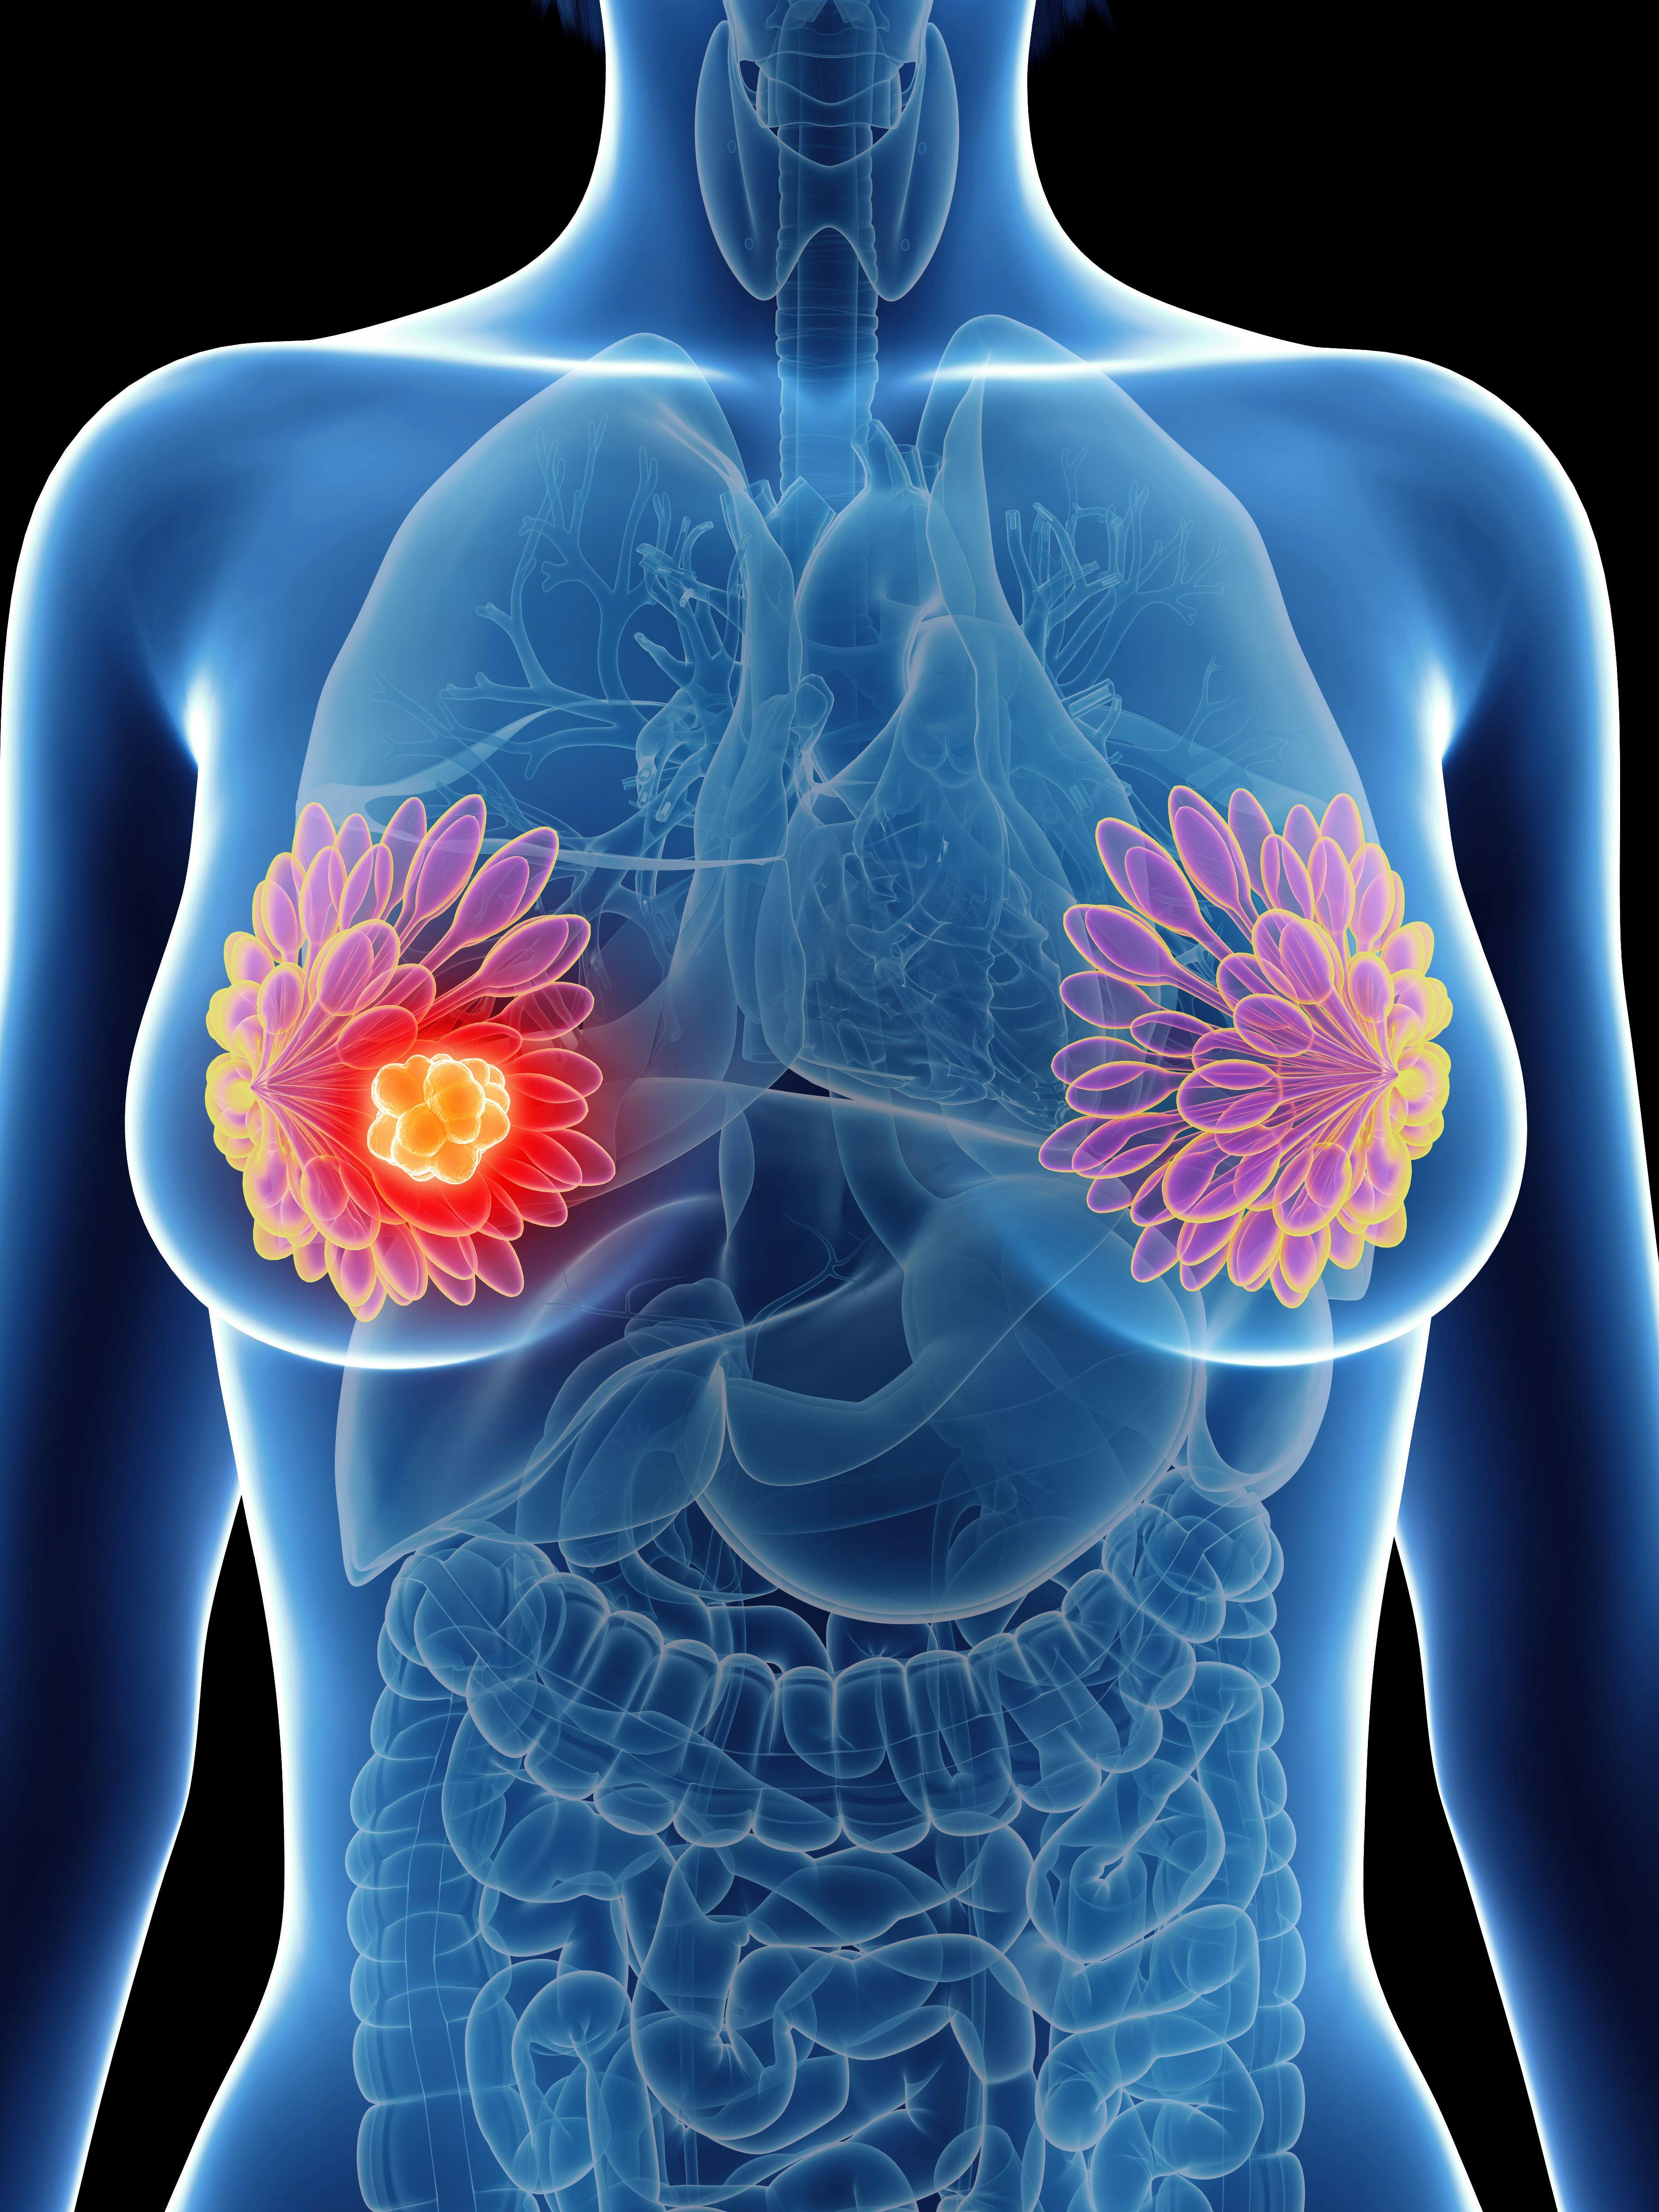 Results from an updated analysis of the DESTINY-Breast04 trial indicate an efficacy improvement when trastuzumab deruxtecan monotherapy is used for patients with HER2-low metastatic breast cancer.